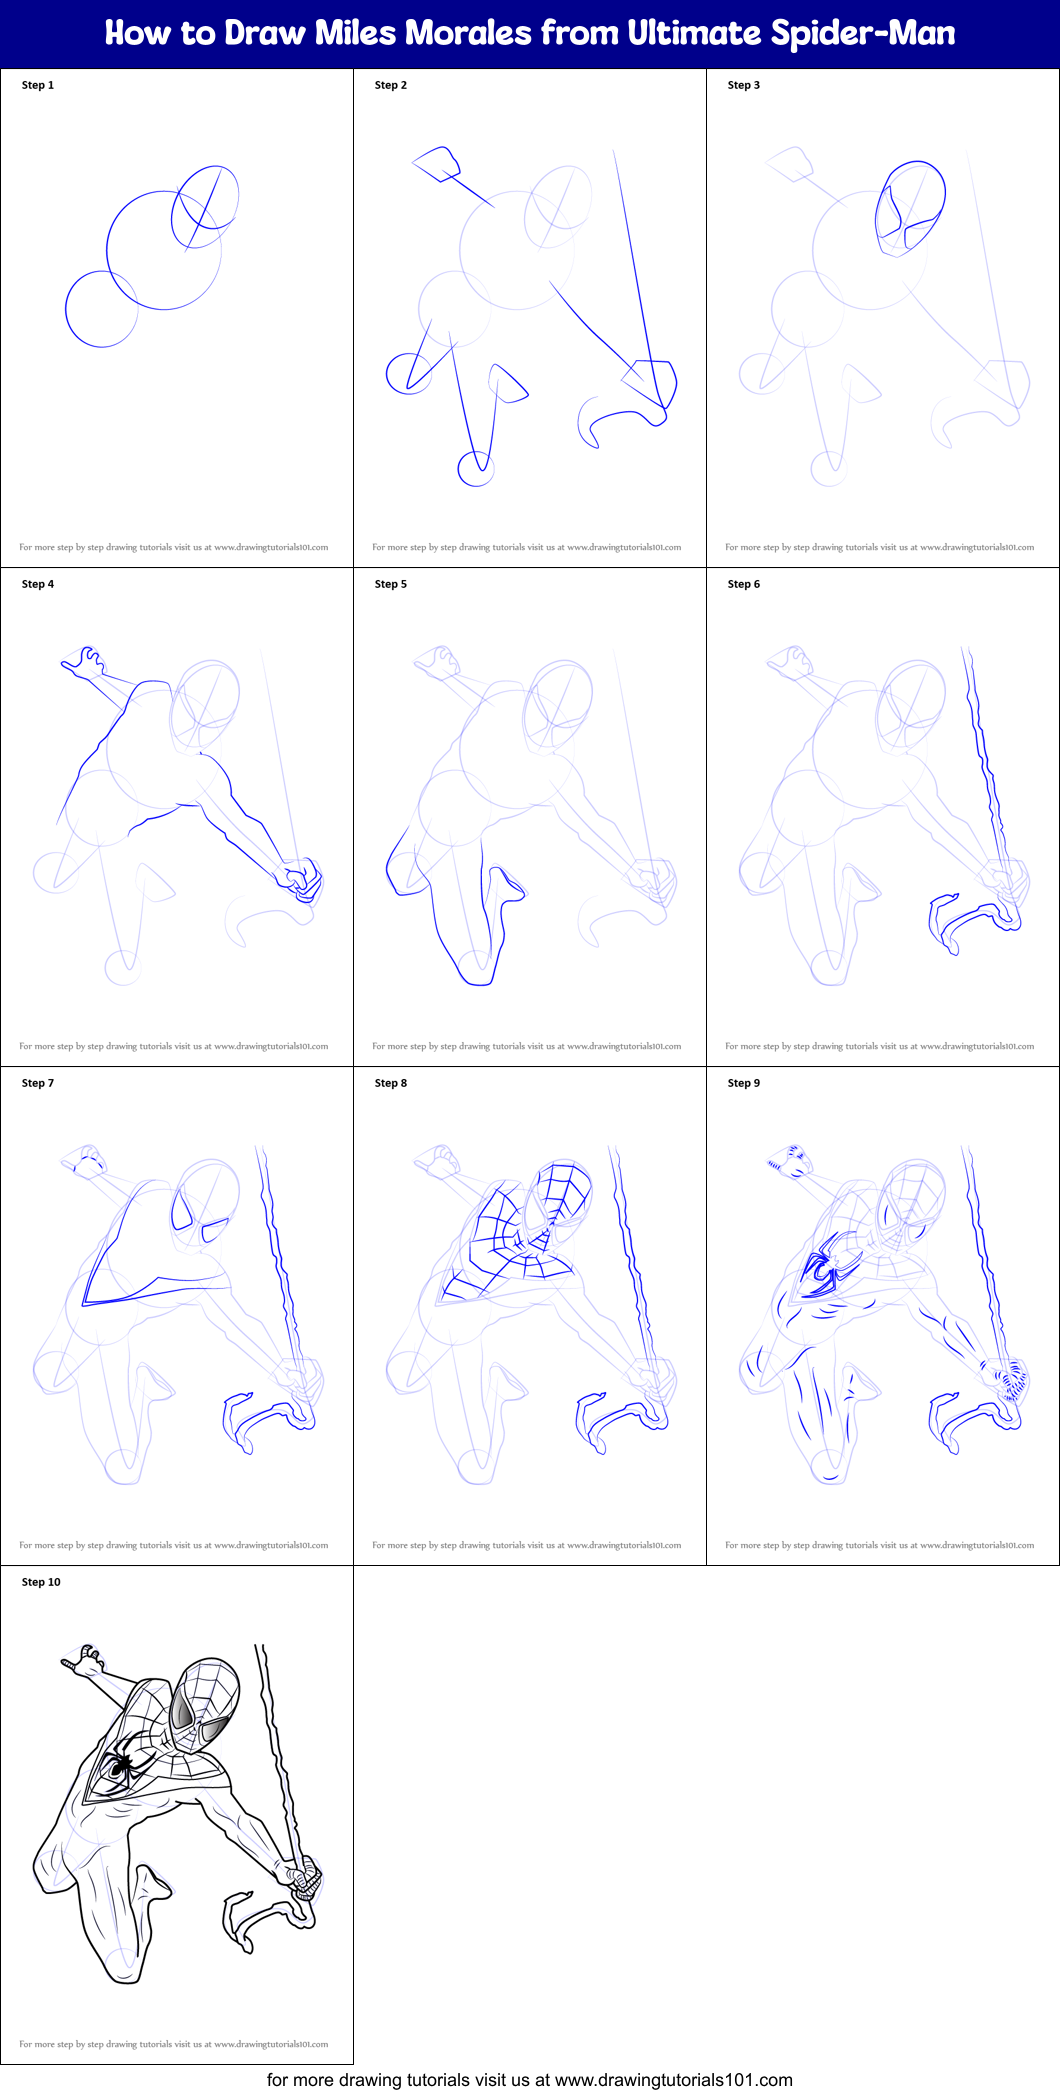 How to Draw Miles Morales from Ultimate Spider-Man printable step by